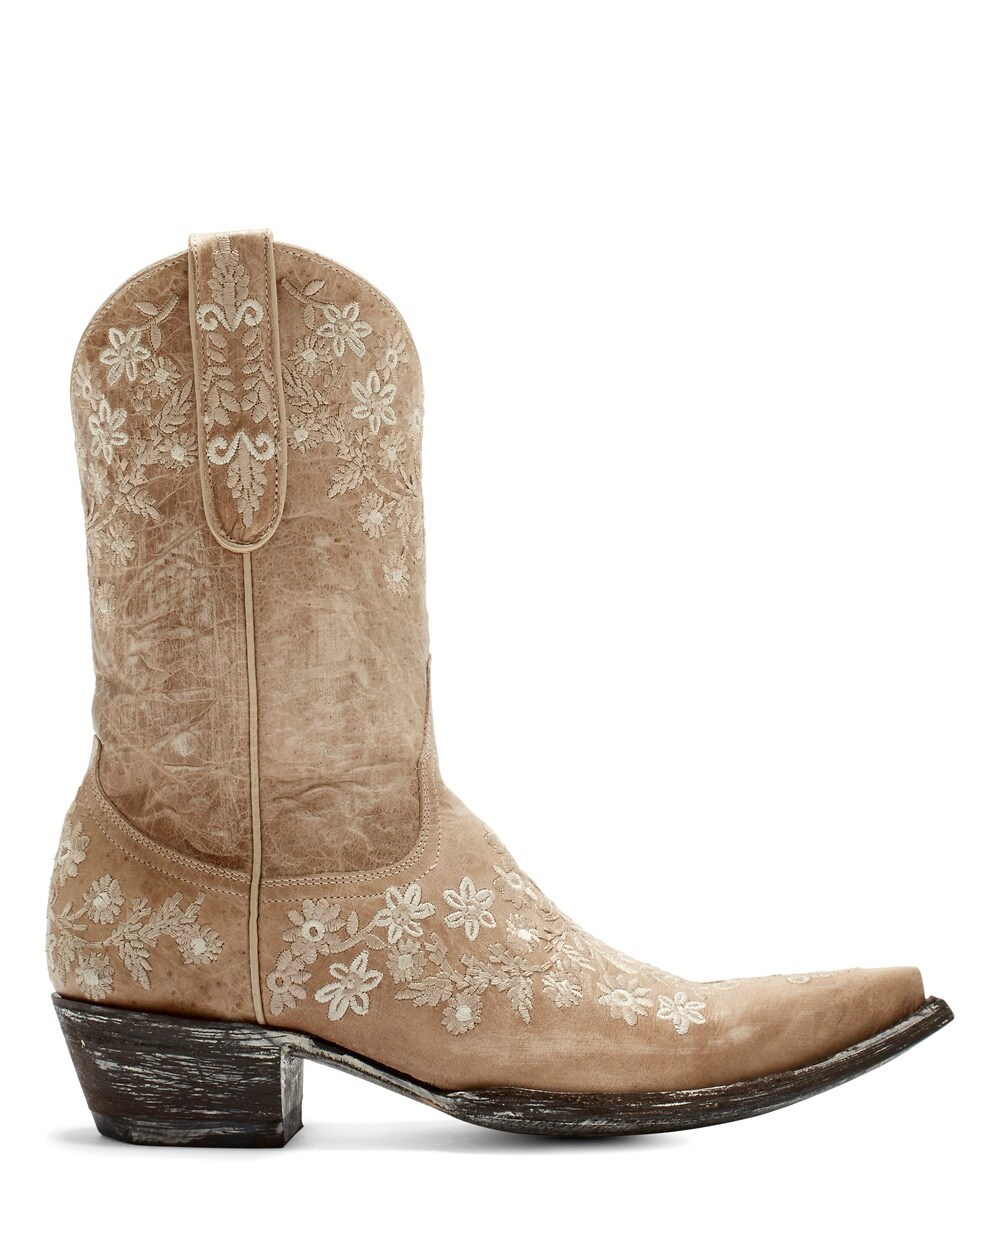 Old Gringo Eveleight Cowboy Boots - Chico's